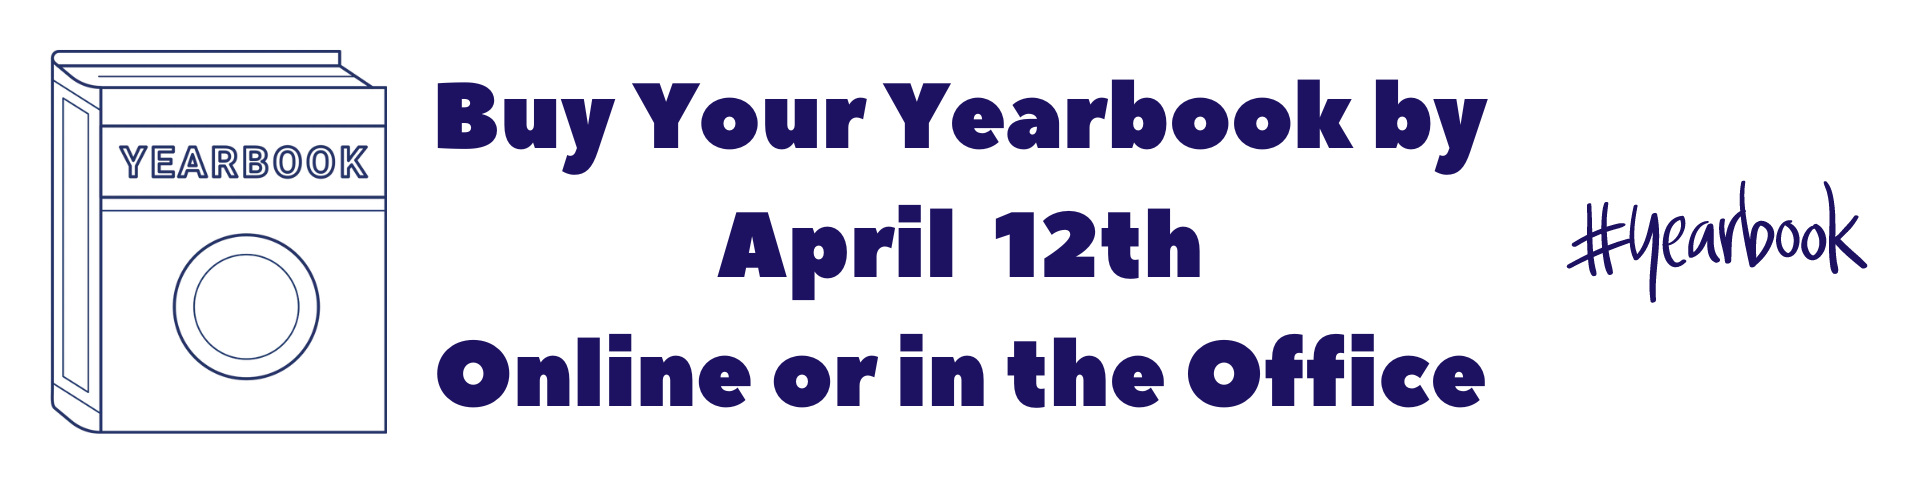 Buy Yearbook by april 12th